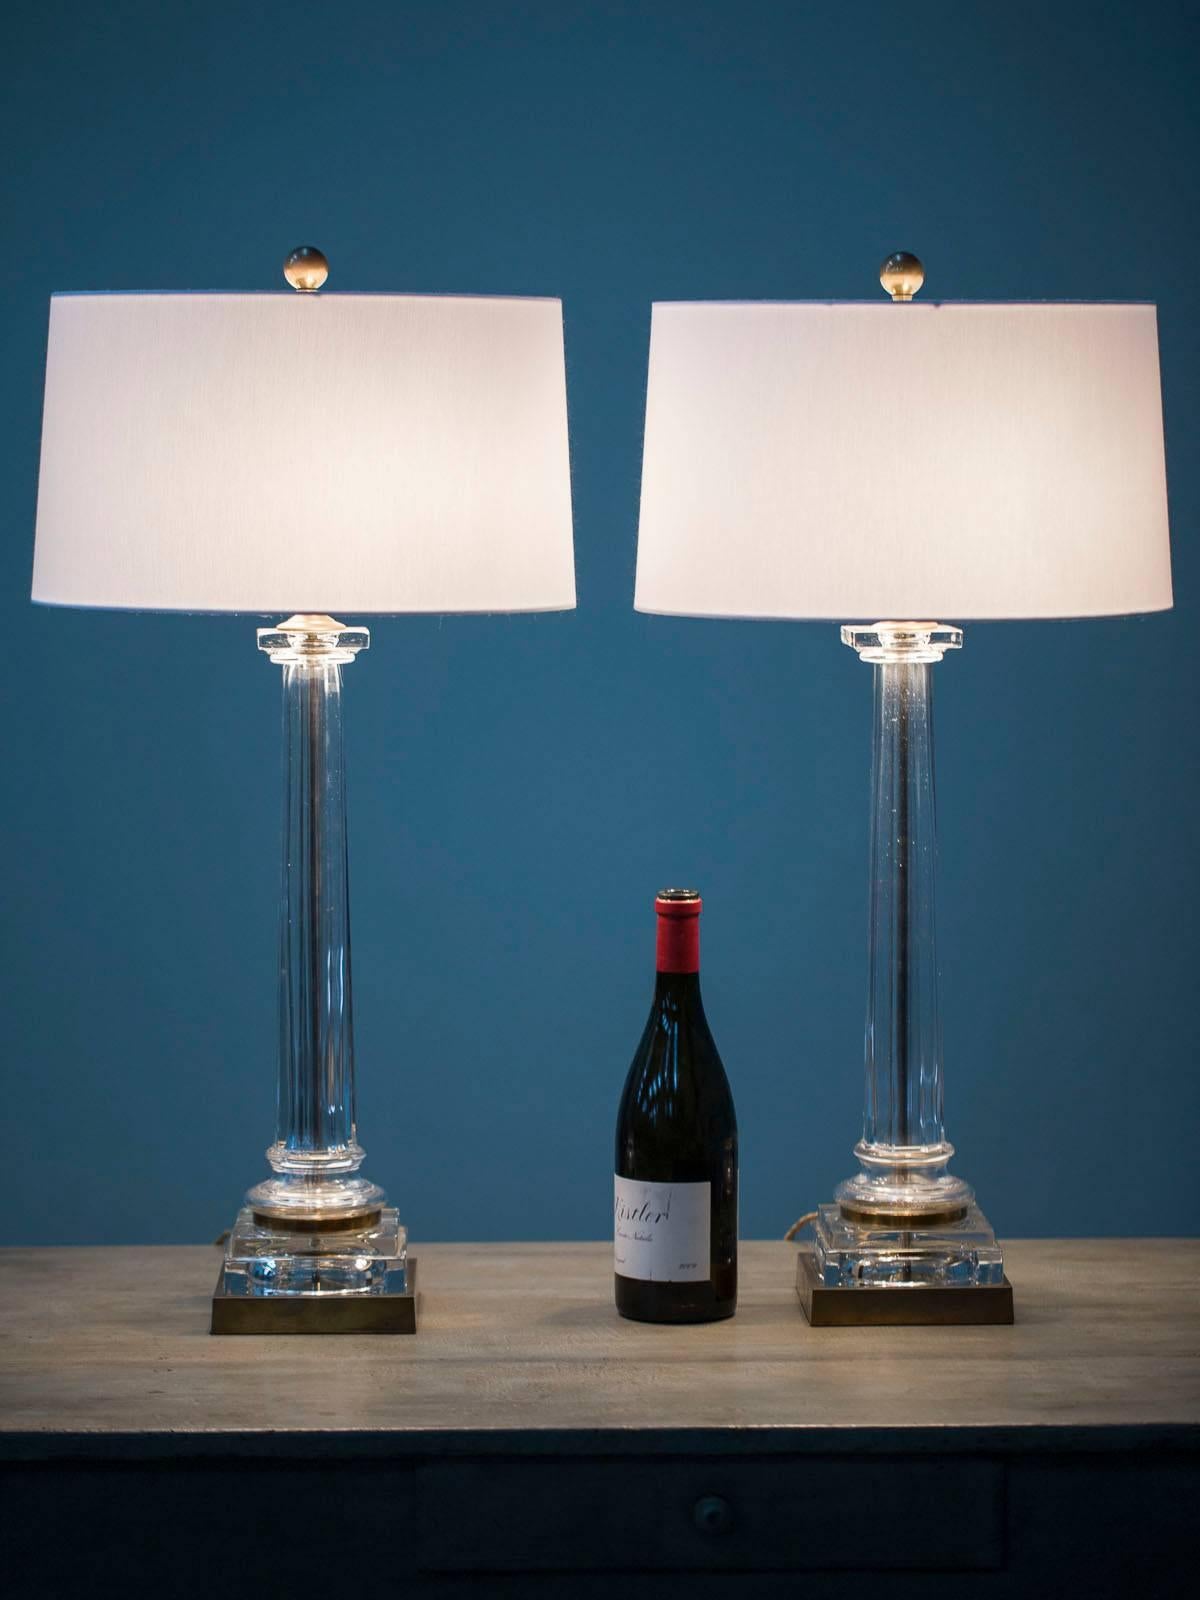 A smashing pair of vintage French solid glass and brass column lamps, circa 1940 now wired for American electricity. Each of the lamps feature a poured glass cylinder with a tapered shape as well as a textured surface. The glass surrounds a brass